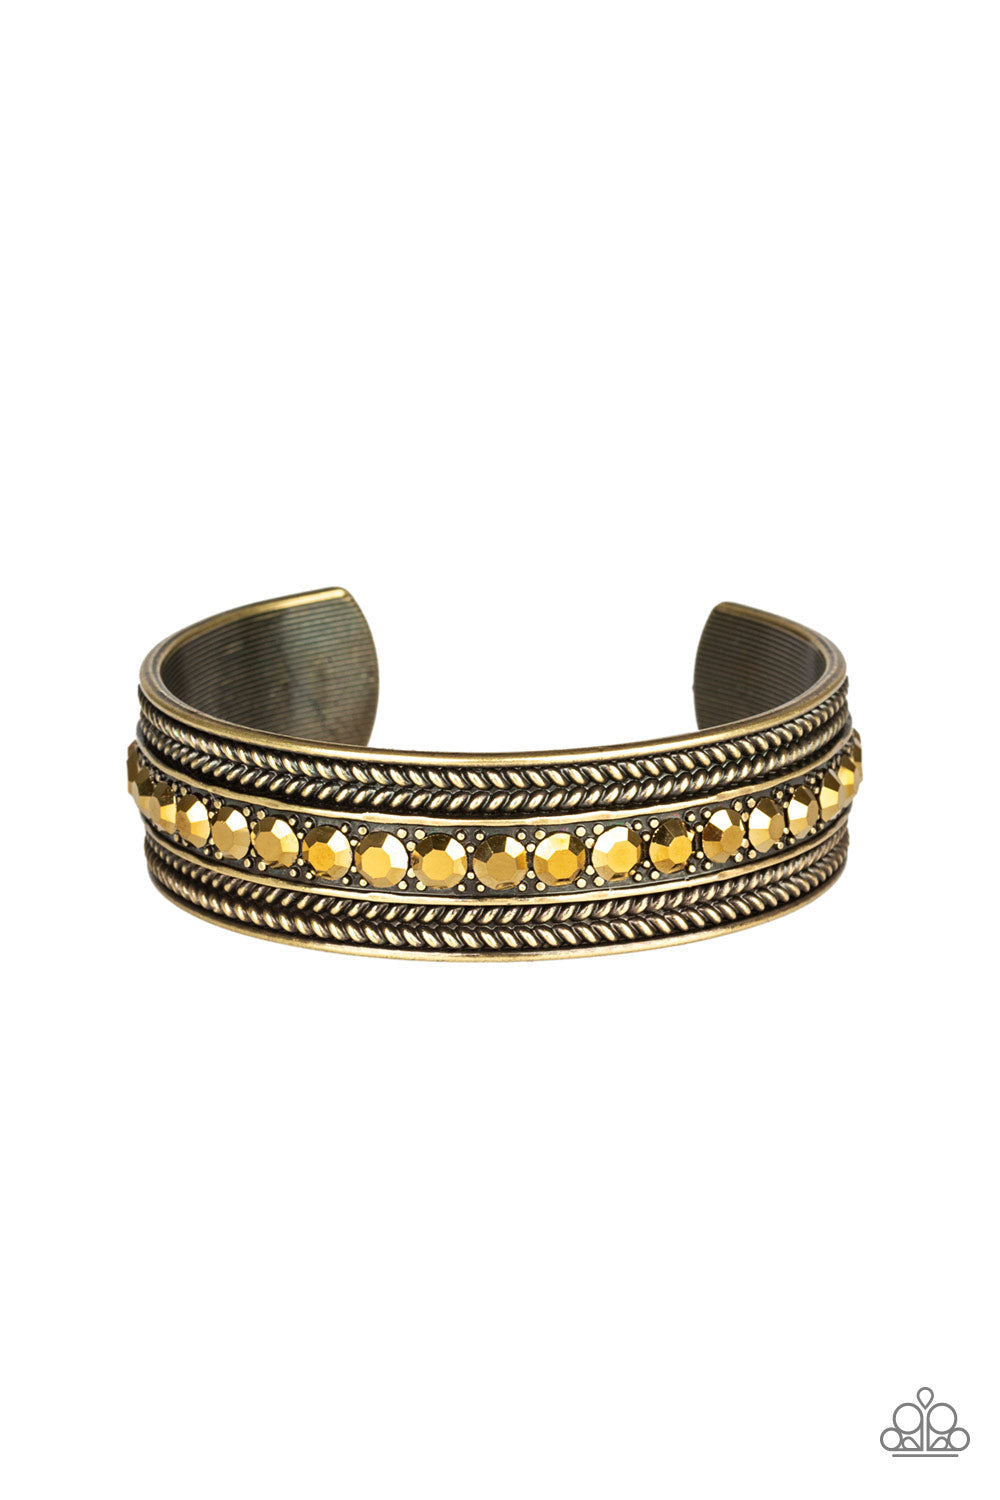 Empress Etiquette - Brass Cuff Bracelet - Paparazzi Accessories - A row of glittery aurum rhinestones are encrusted down the center of a studded brass cuff for an edgy look. Sold as one individual bracelet.